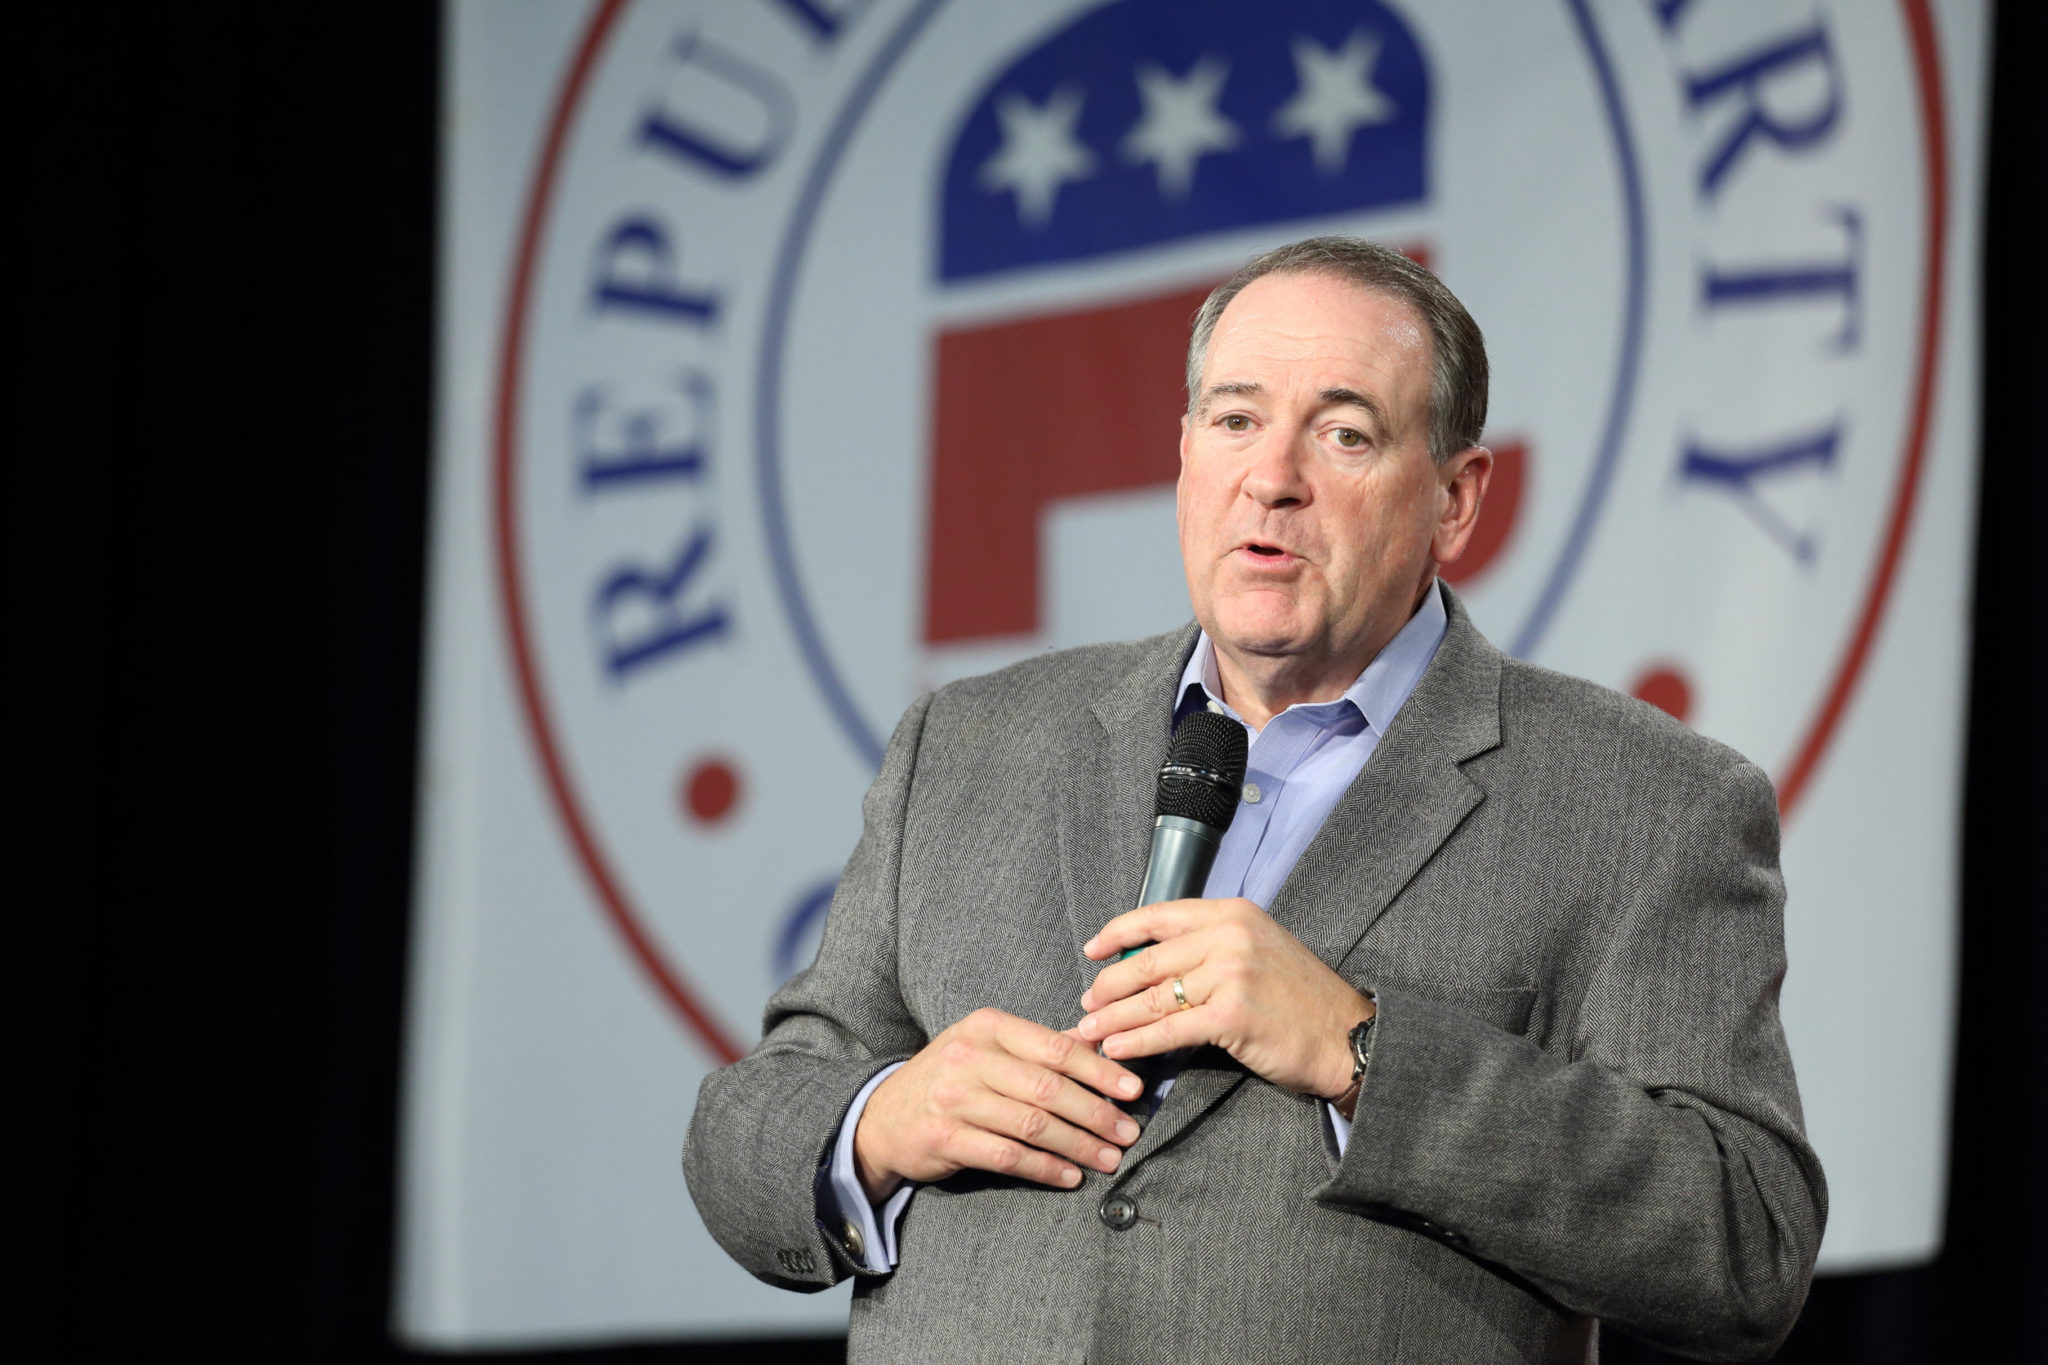 Mike Huckabee speaks at a Republican rally